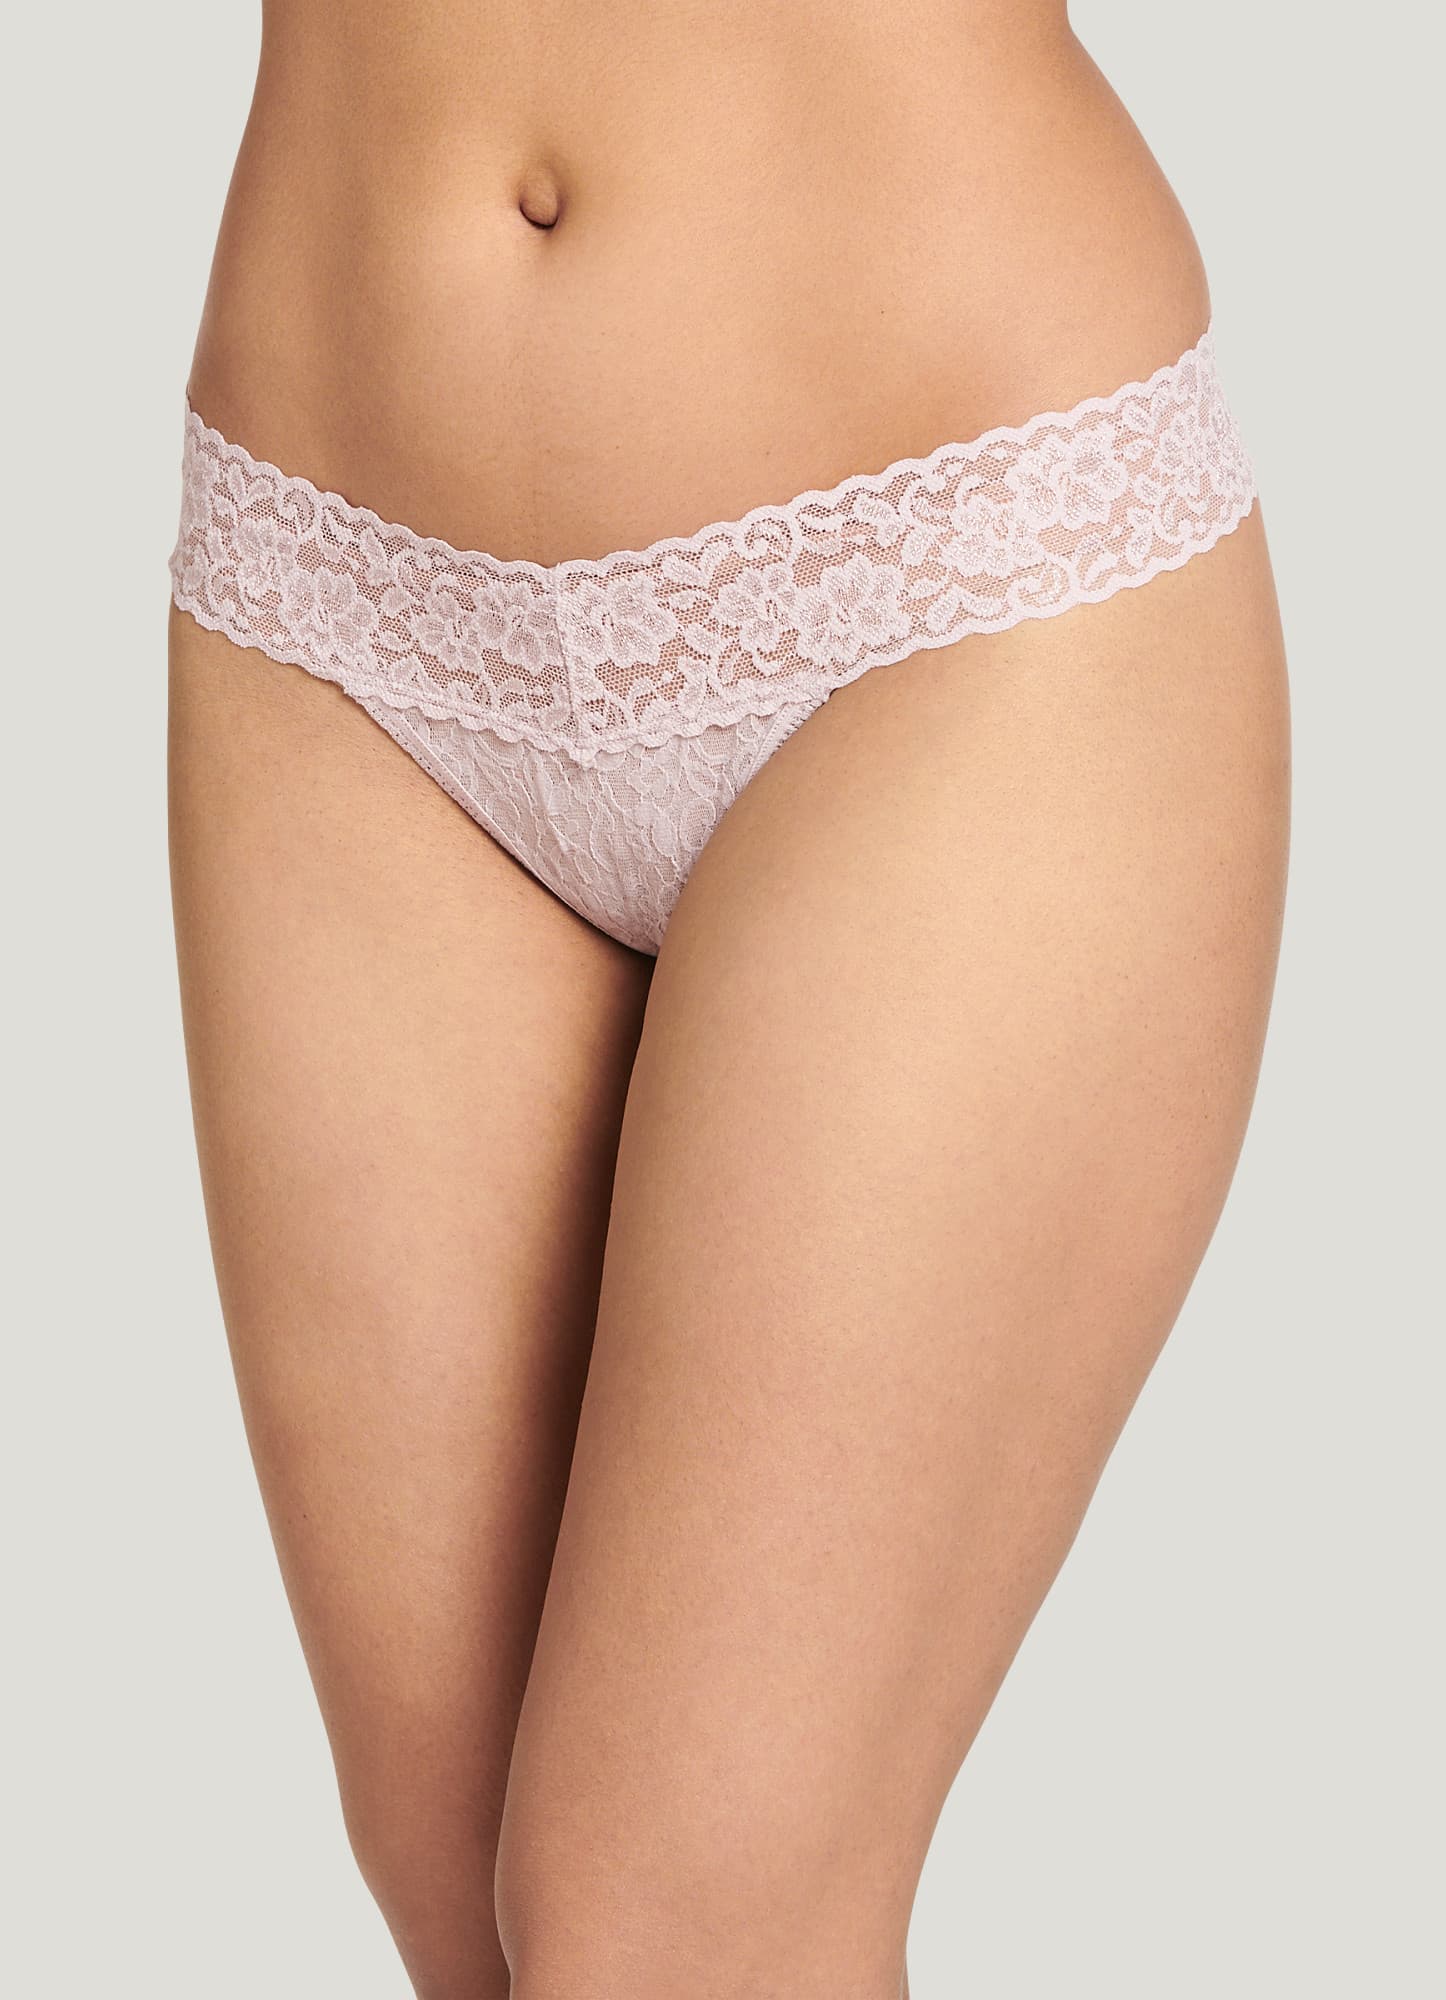 All-Over Lace Cheeky Panties, R Line